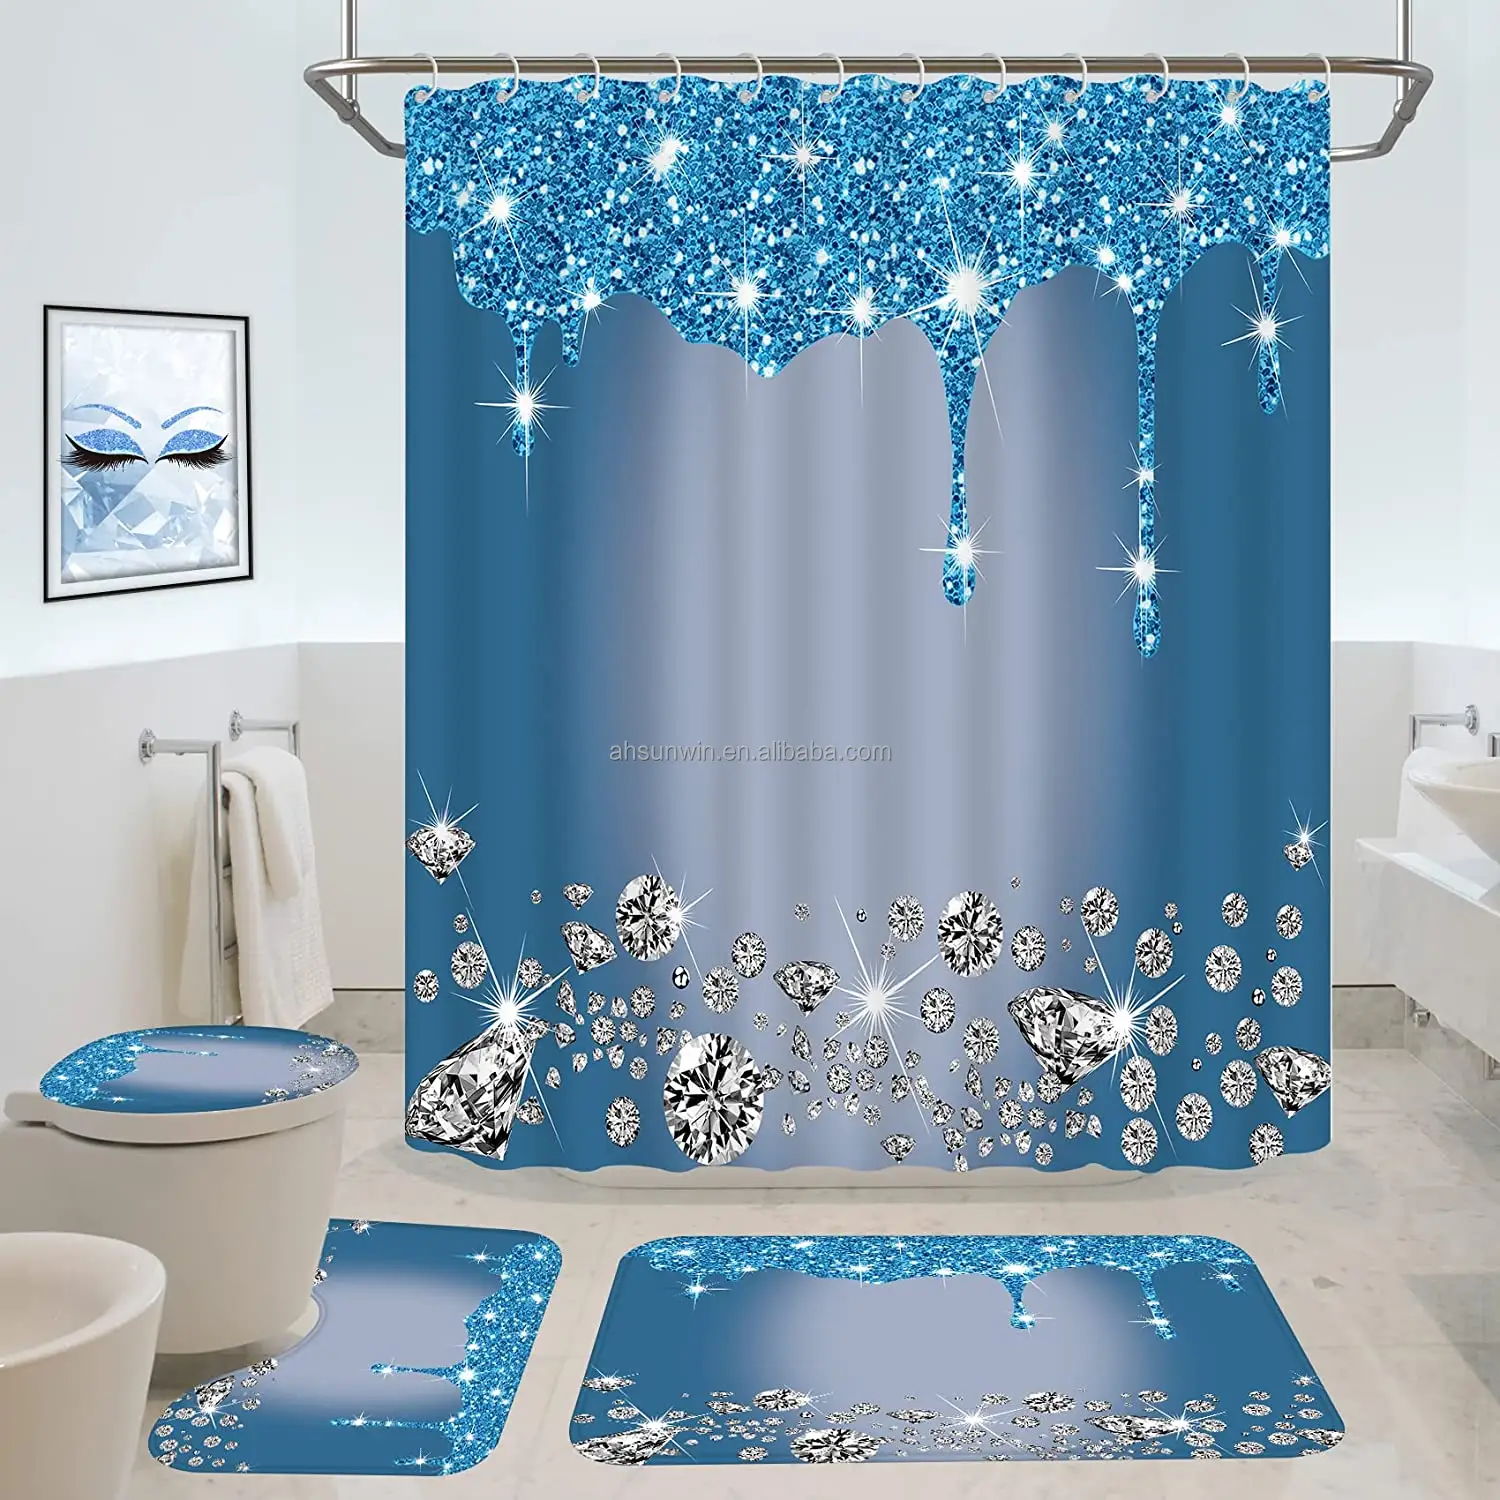 4 Pcs Glitter Diamond Shower Curtain Sets with Rugs Luxury Texture Colorful Bling Modern Bathroom Curtain with 12 Hooks